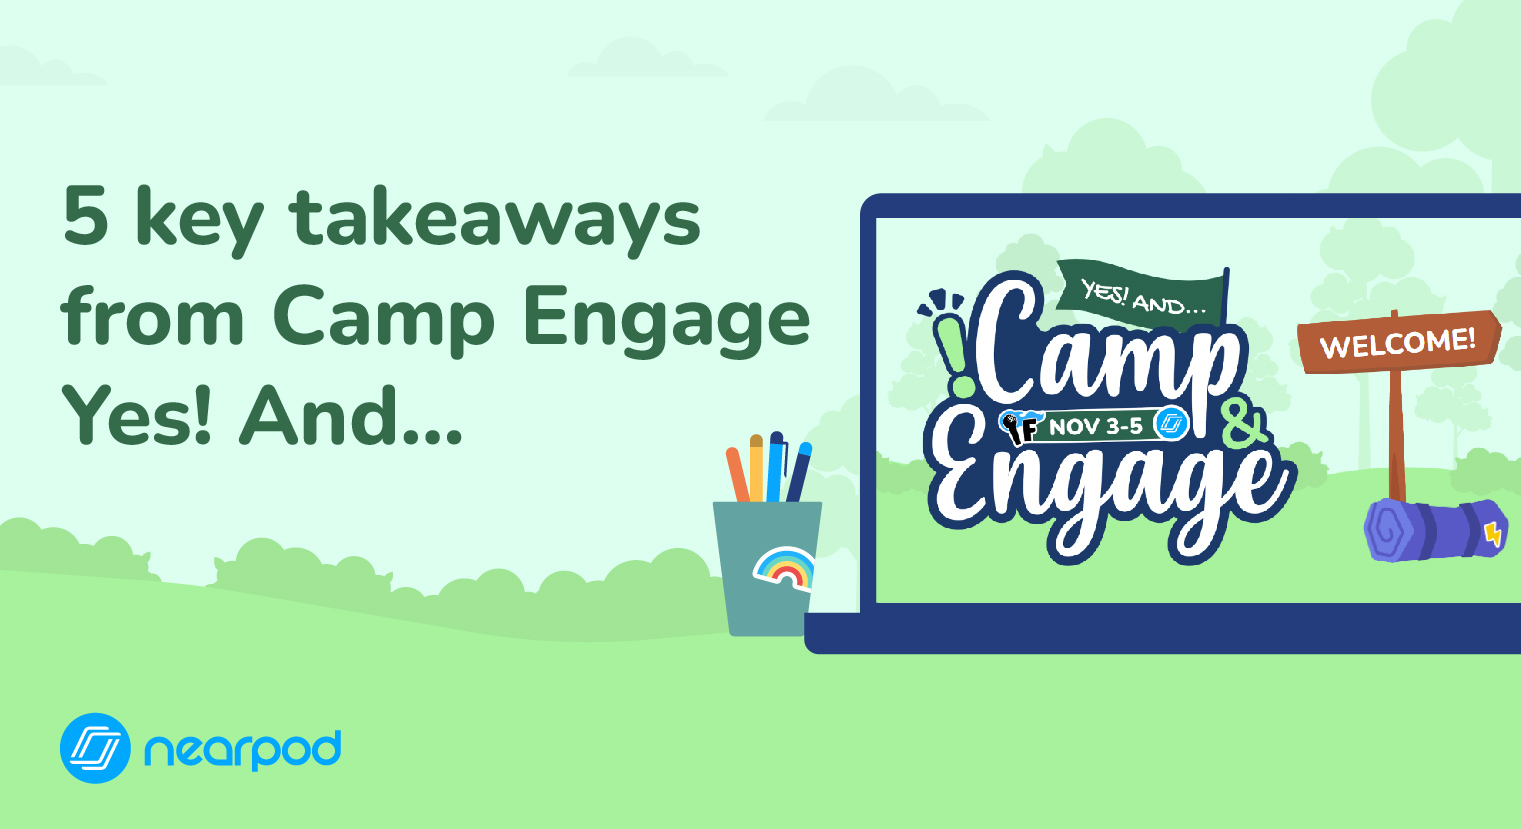 5 key takeaways from Camp Engage Yes! And… Blog image